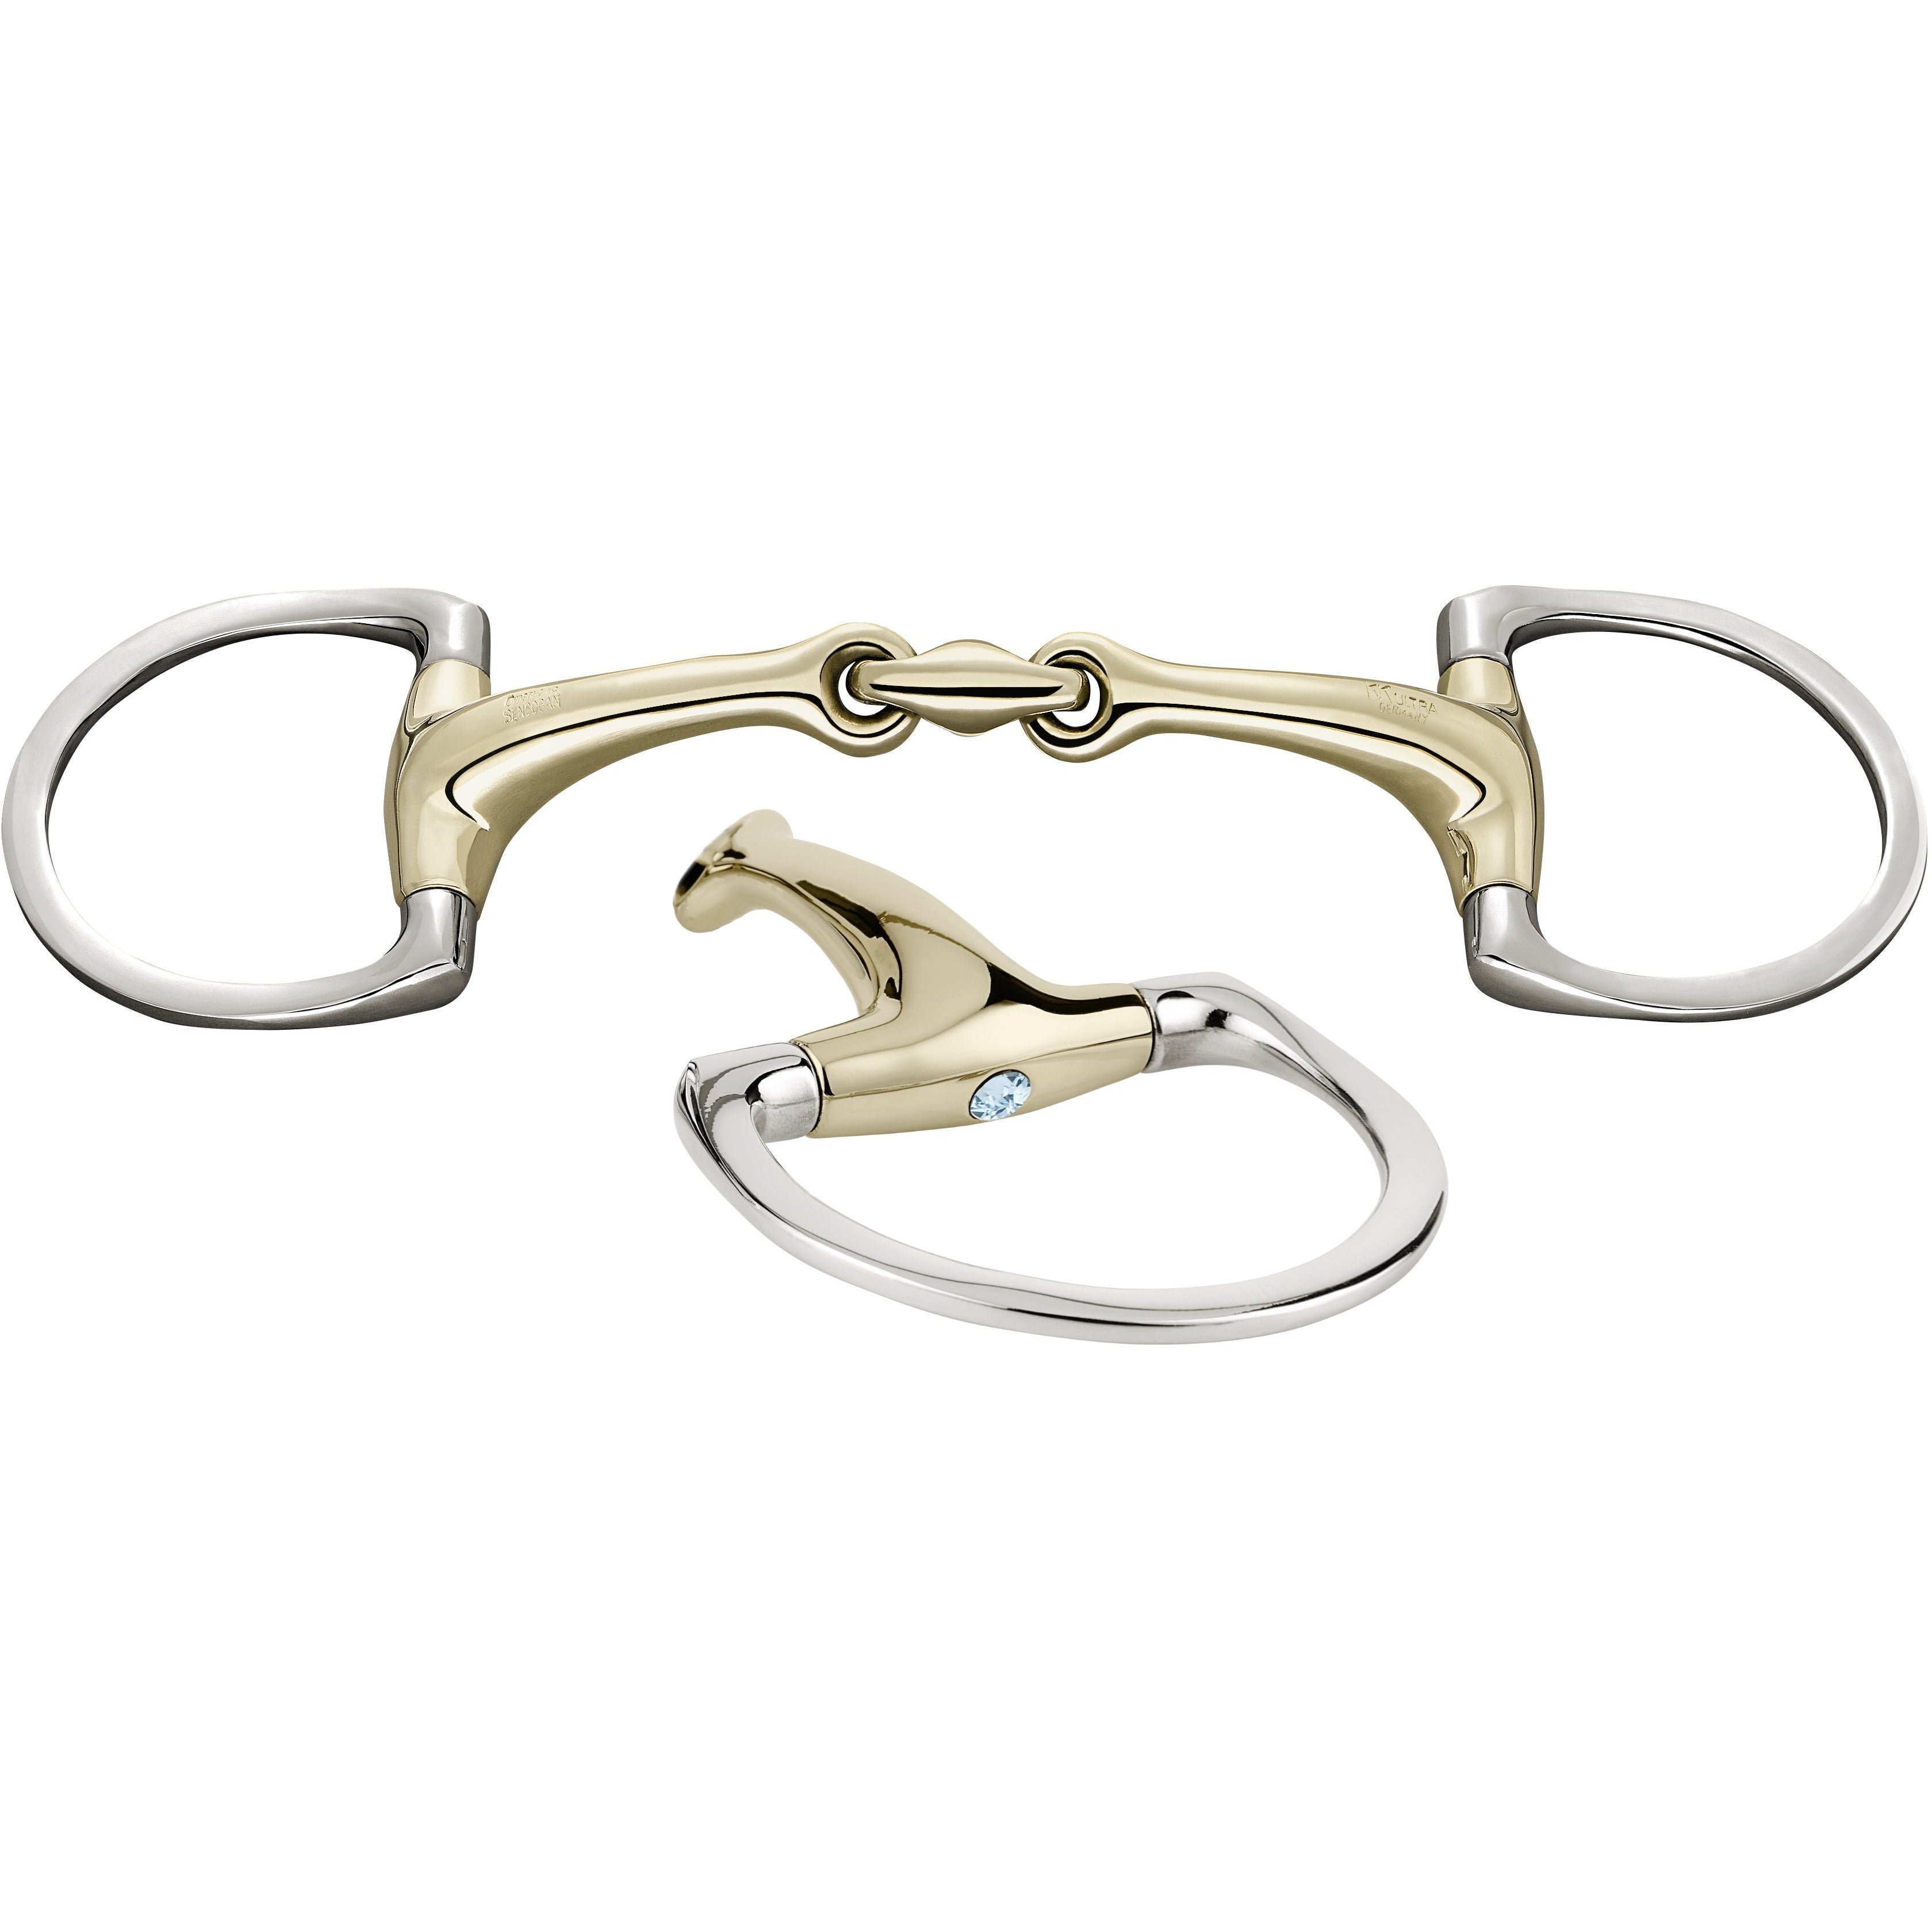 Sprenger 40406 Dynamic RS Snaffle 16mm - Shine Bright Edition - TO ORDER